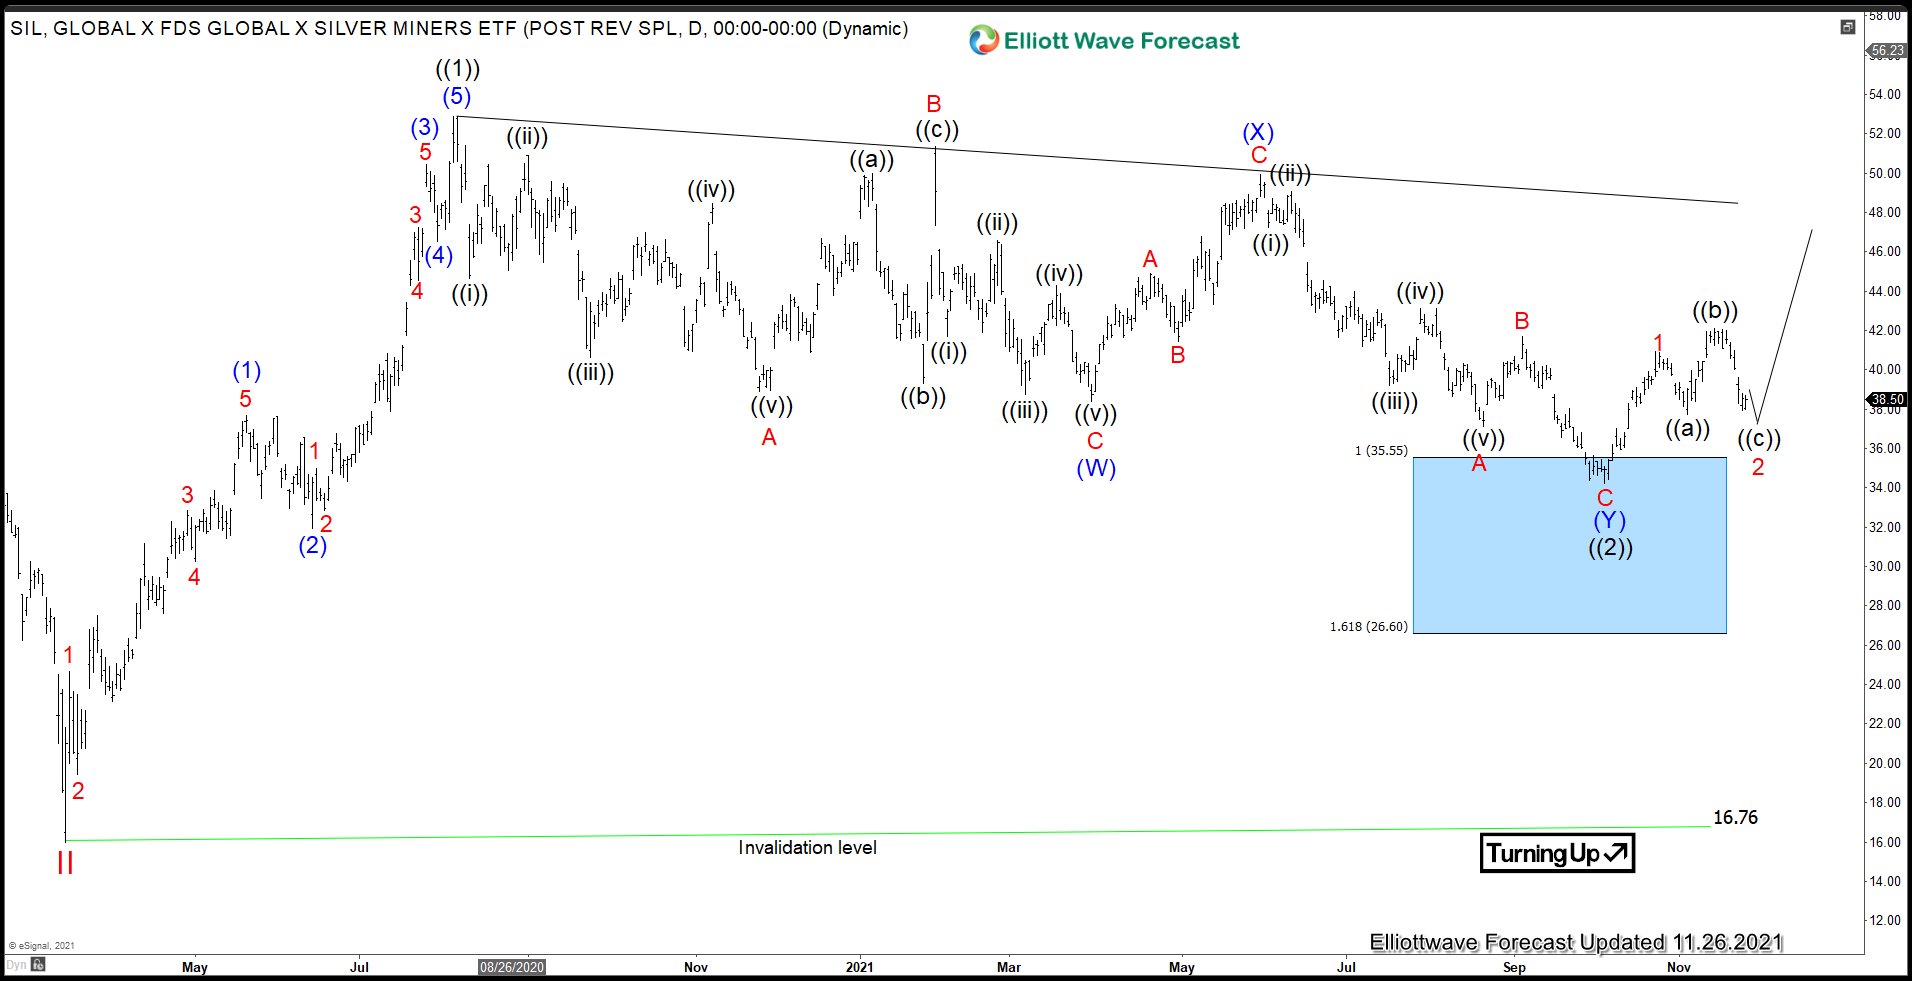 Elliott Wave Forecast: Silver Miners (SIL) Doing Flat Correction